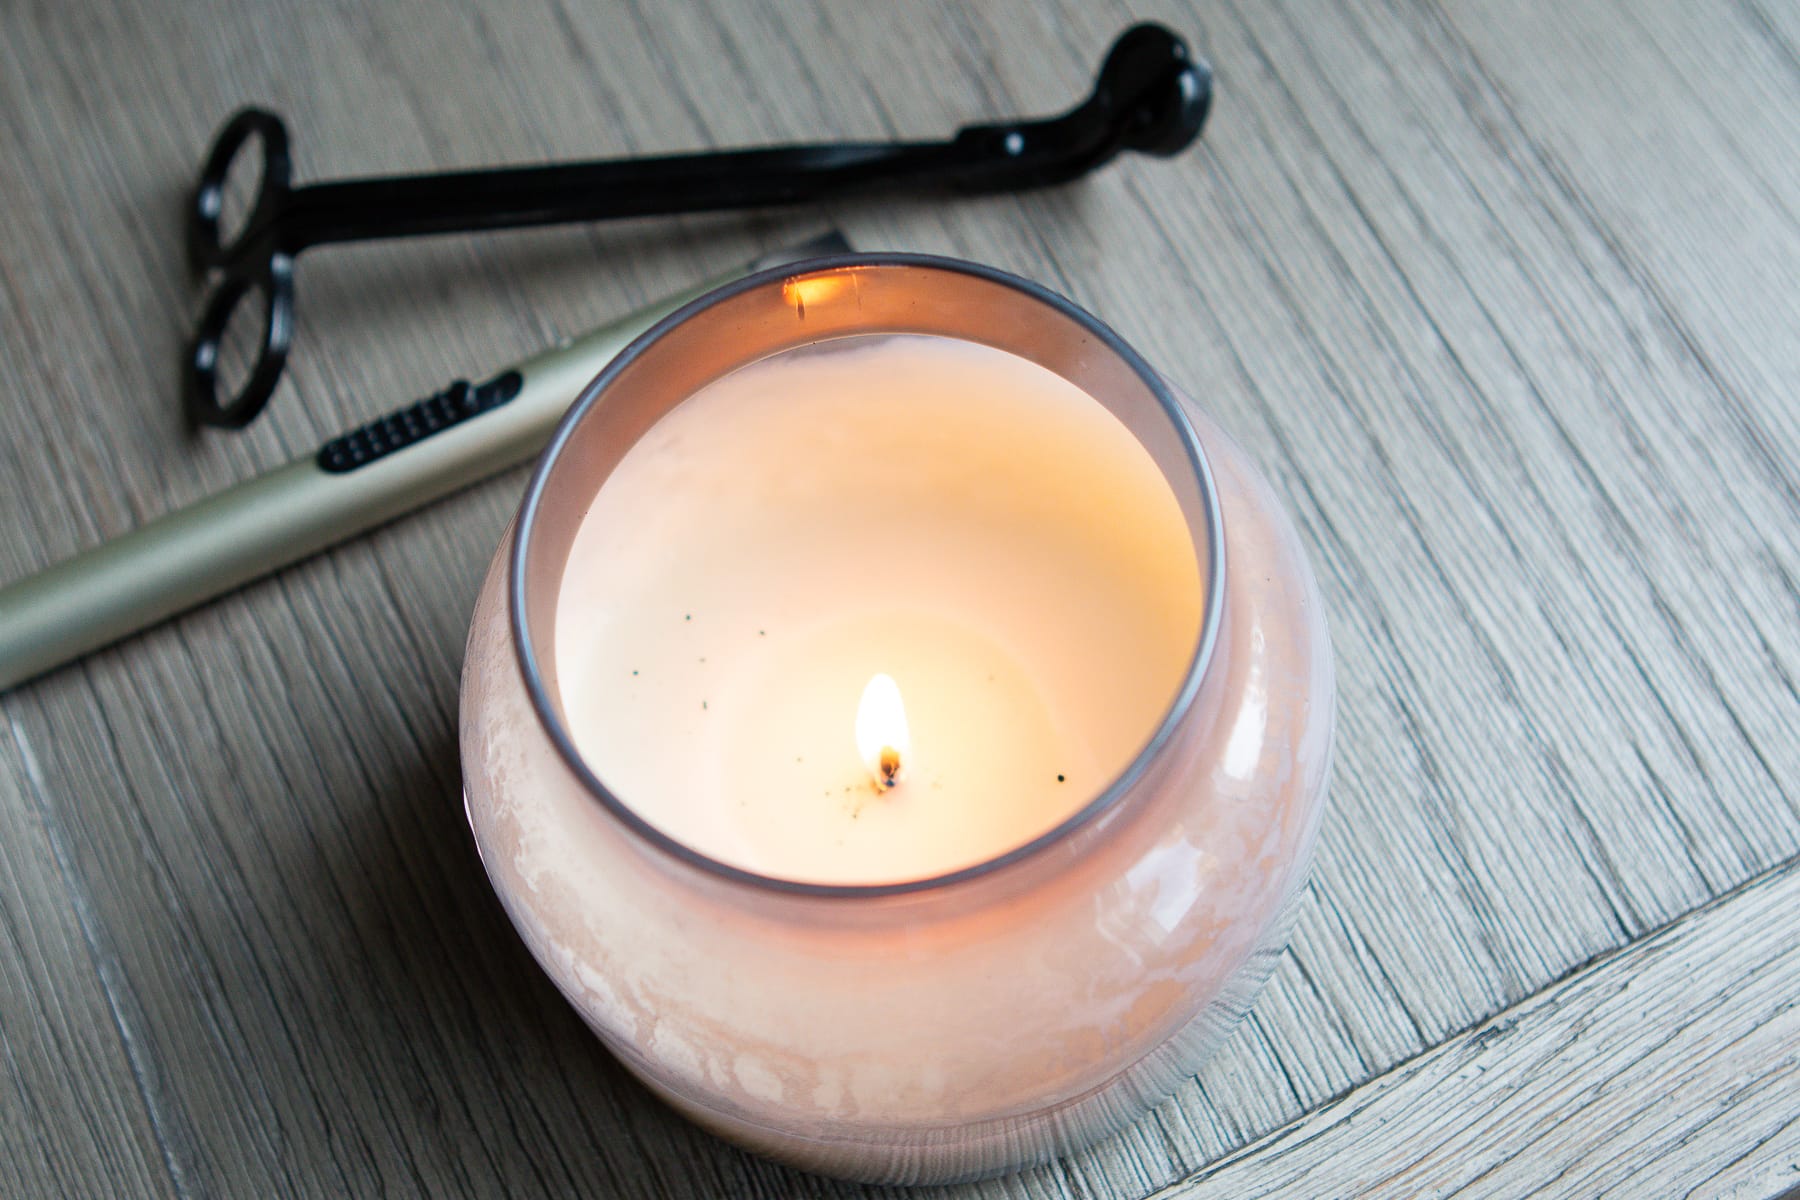 Don't burn your candles for too long. That's a common candle burning mistake 